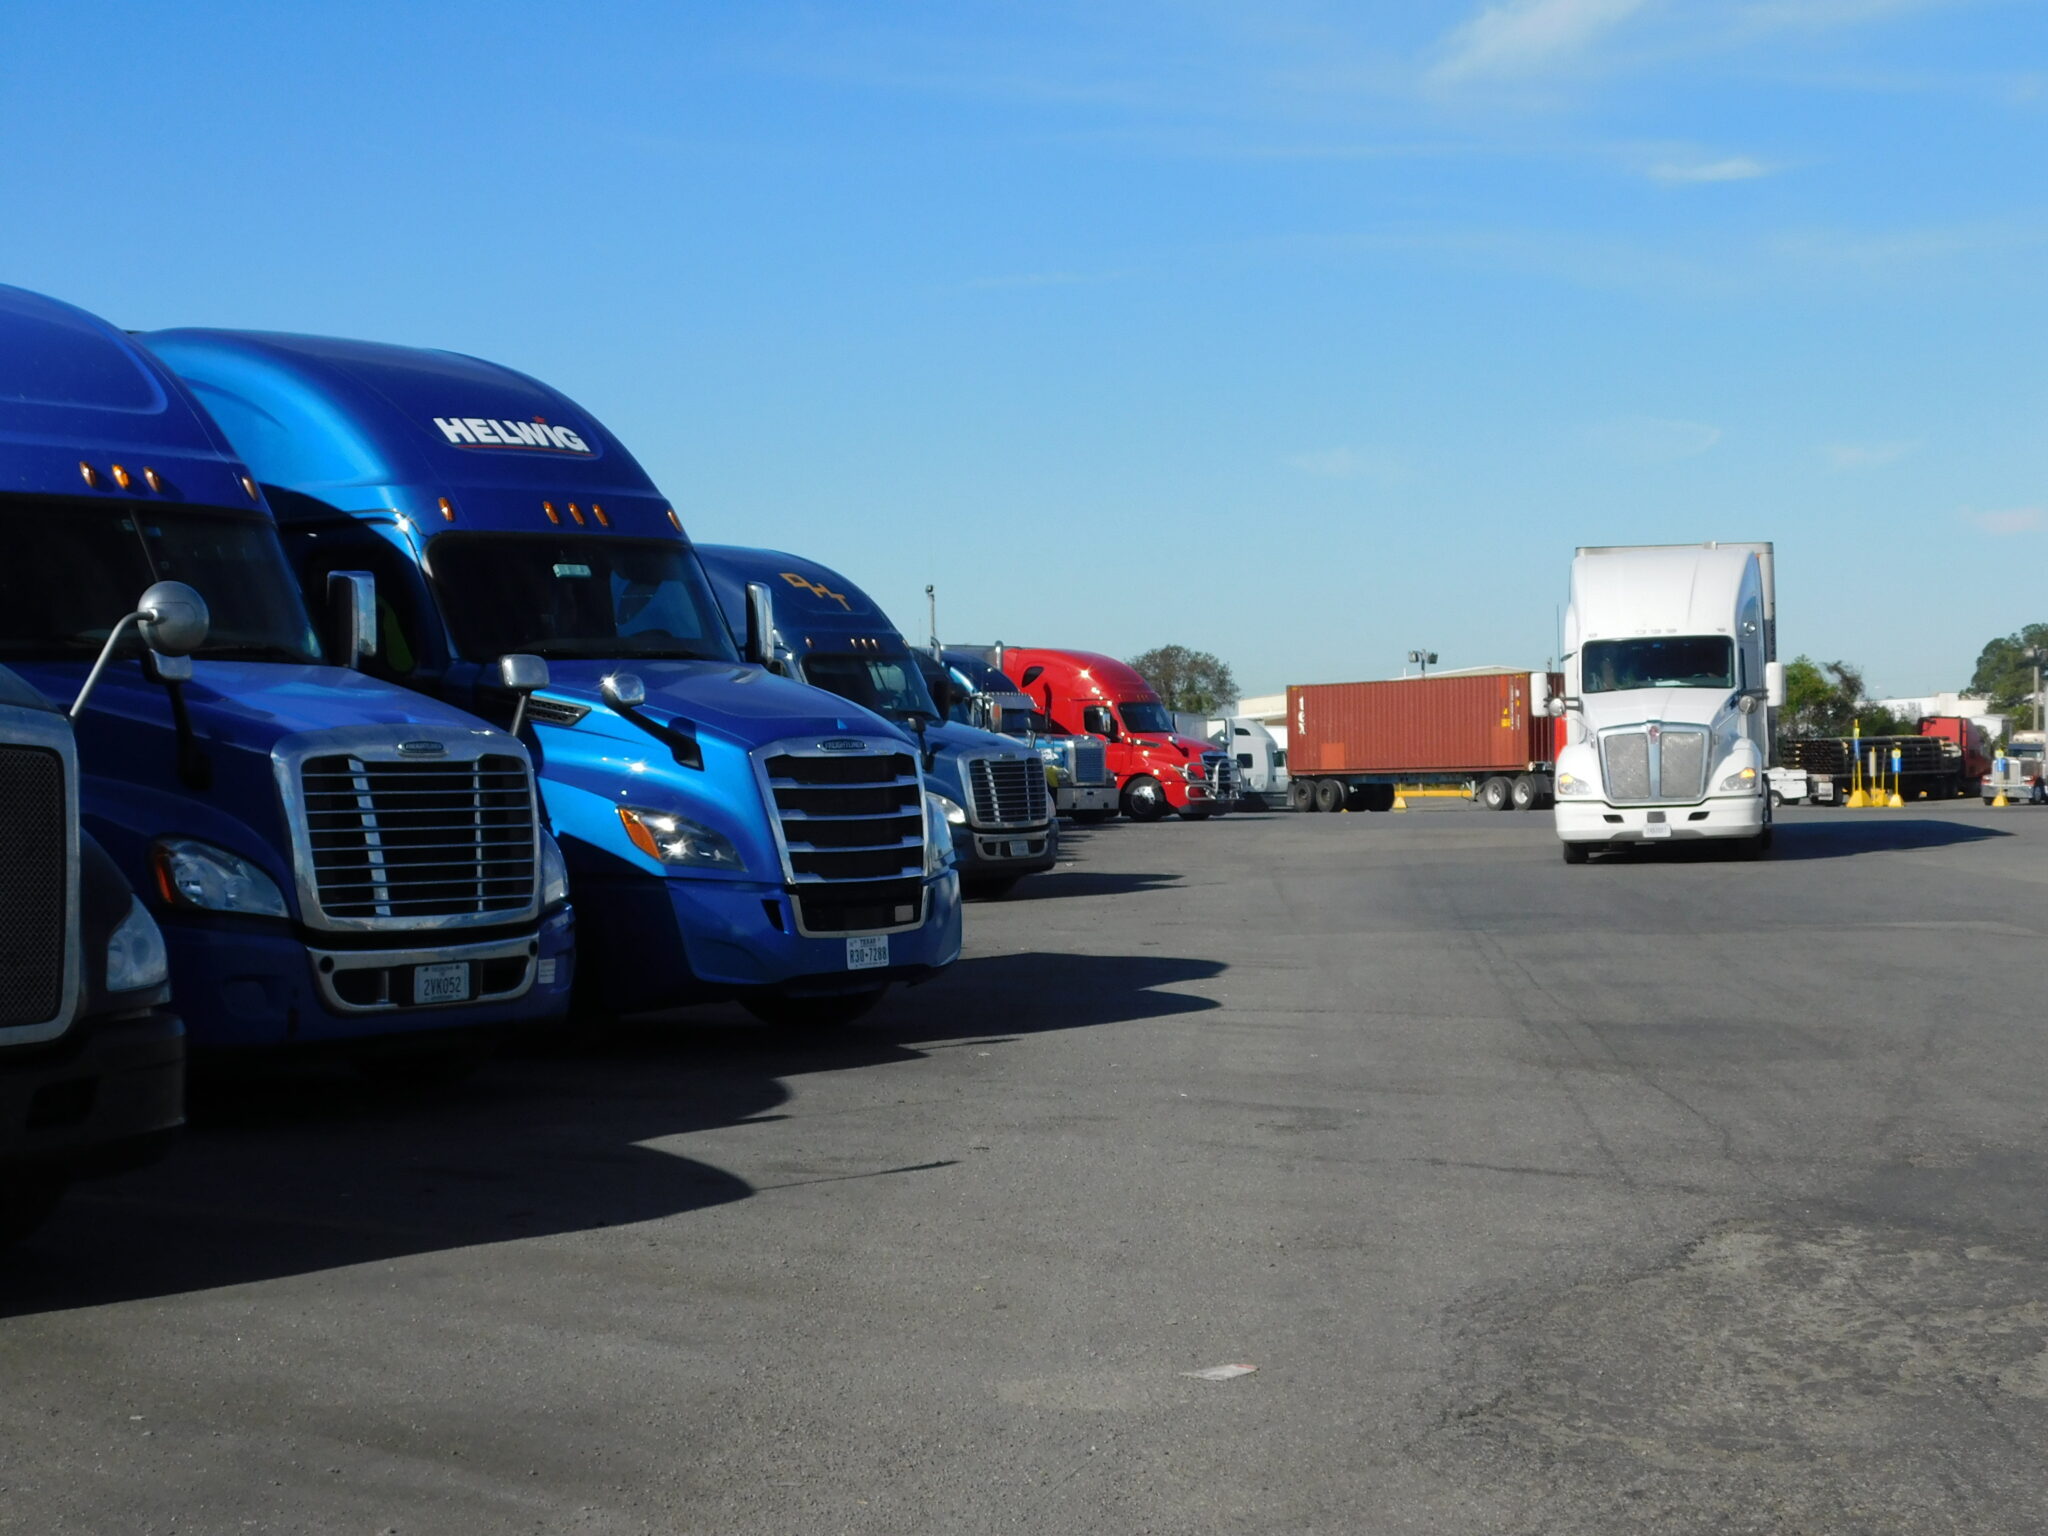 Truck Parking Near Me opens 2 overnight, monthly locations in Chicago area